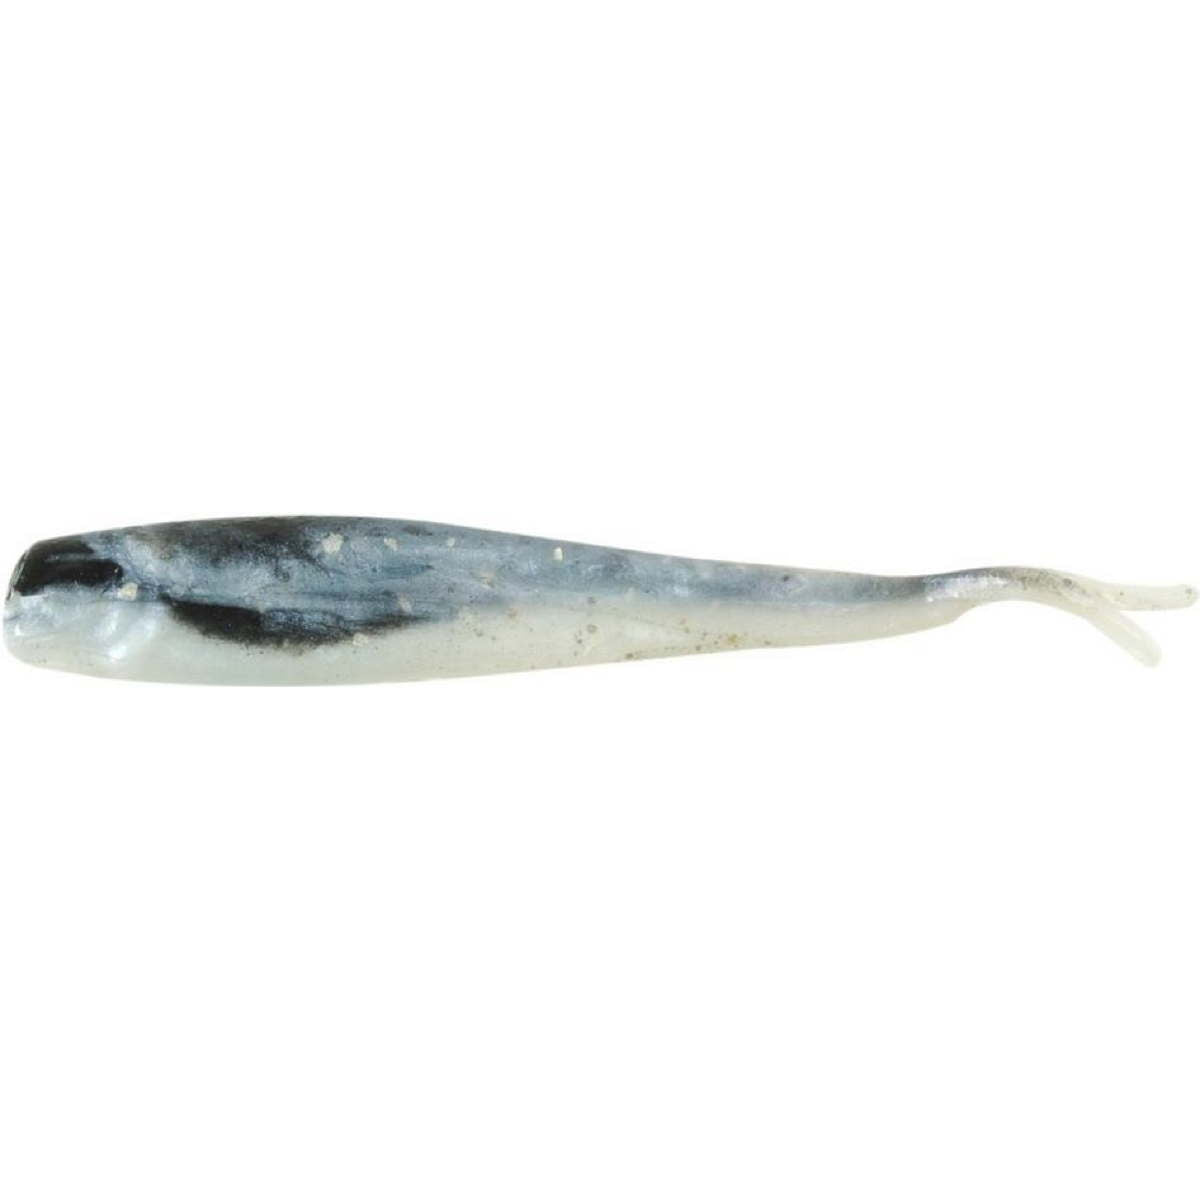 Photo of Berkley Gulp! Alive! Minnow  for sale at United Tackle Shops.